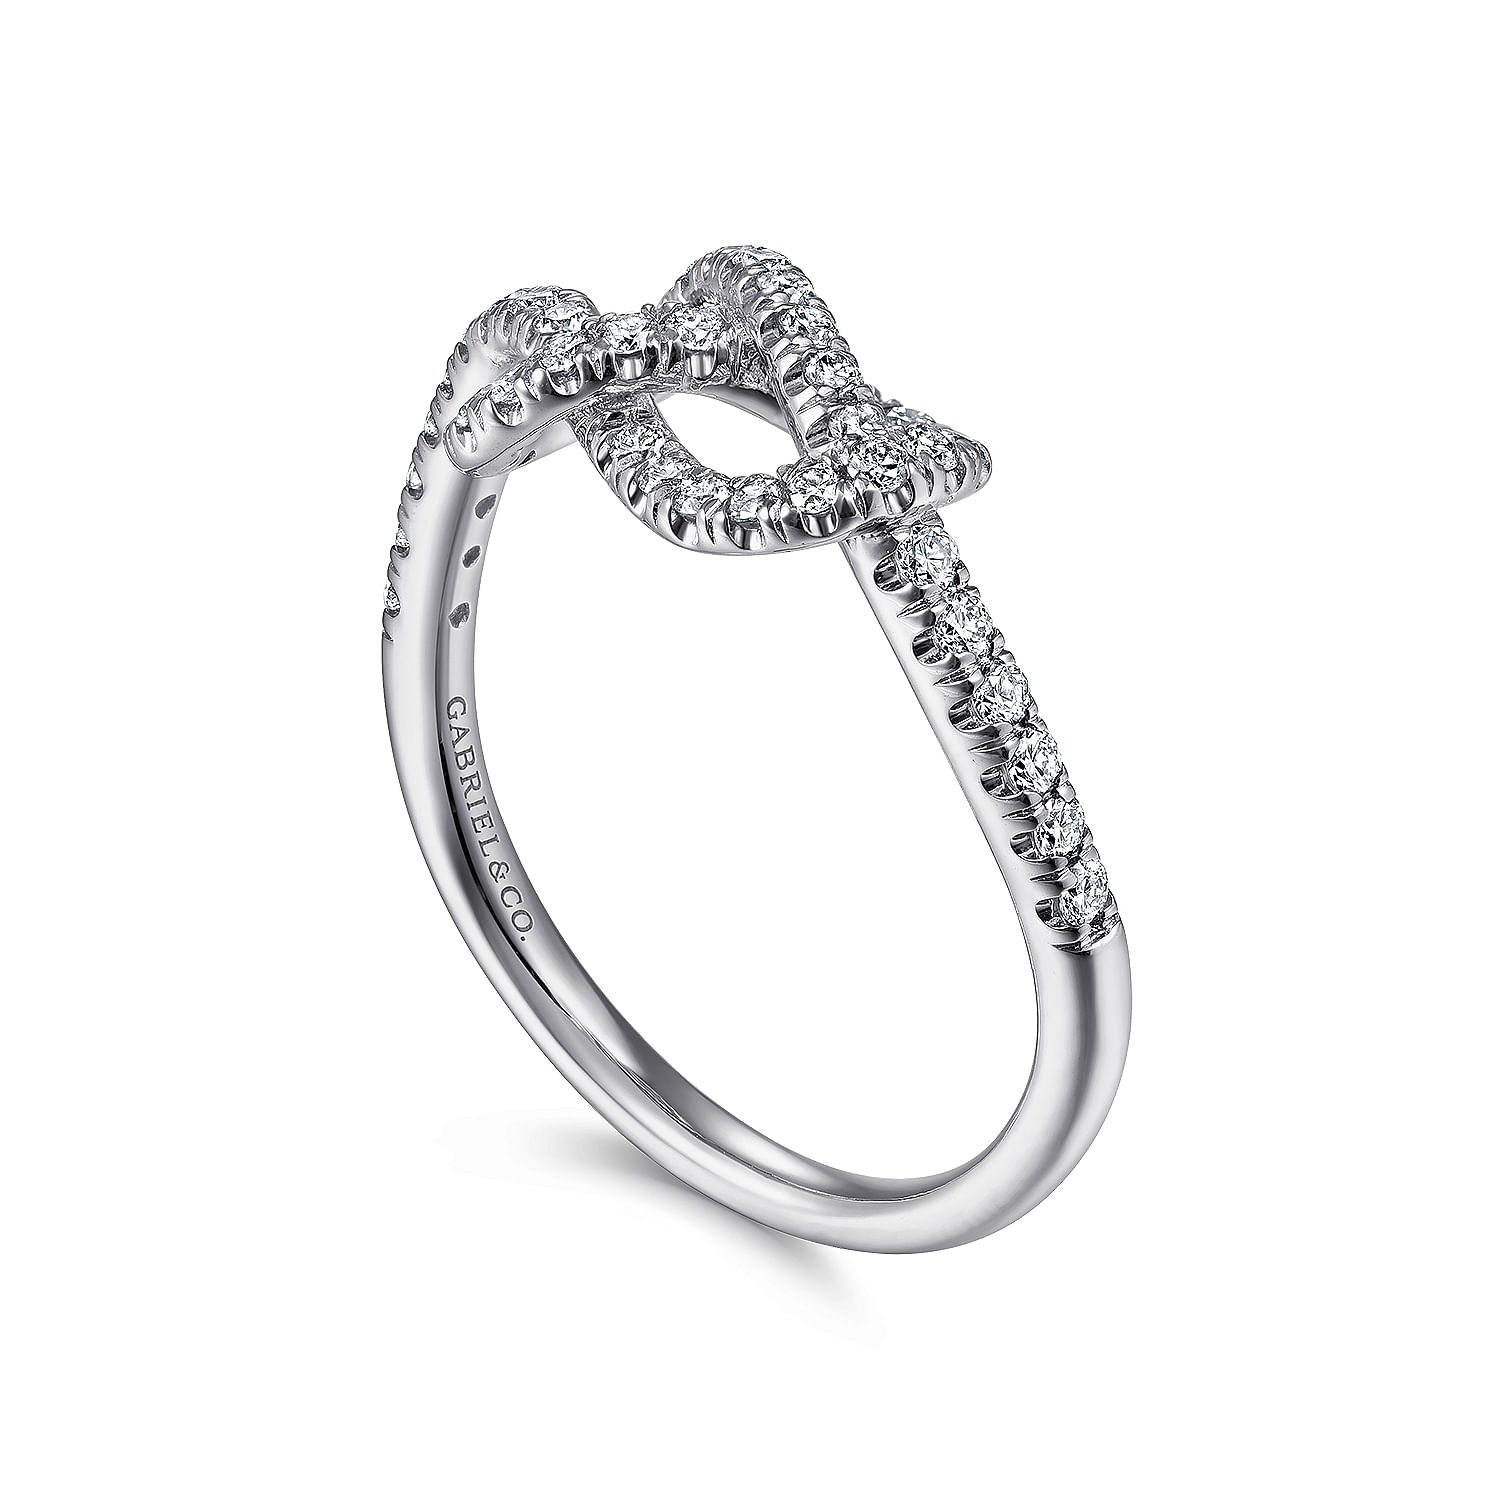 14k White Gold Twisted Diamond Knot Eternity Ring